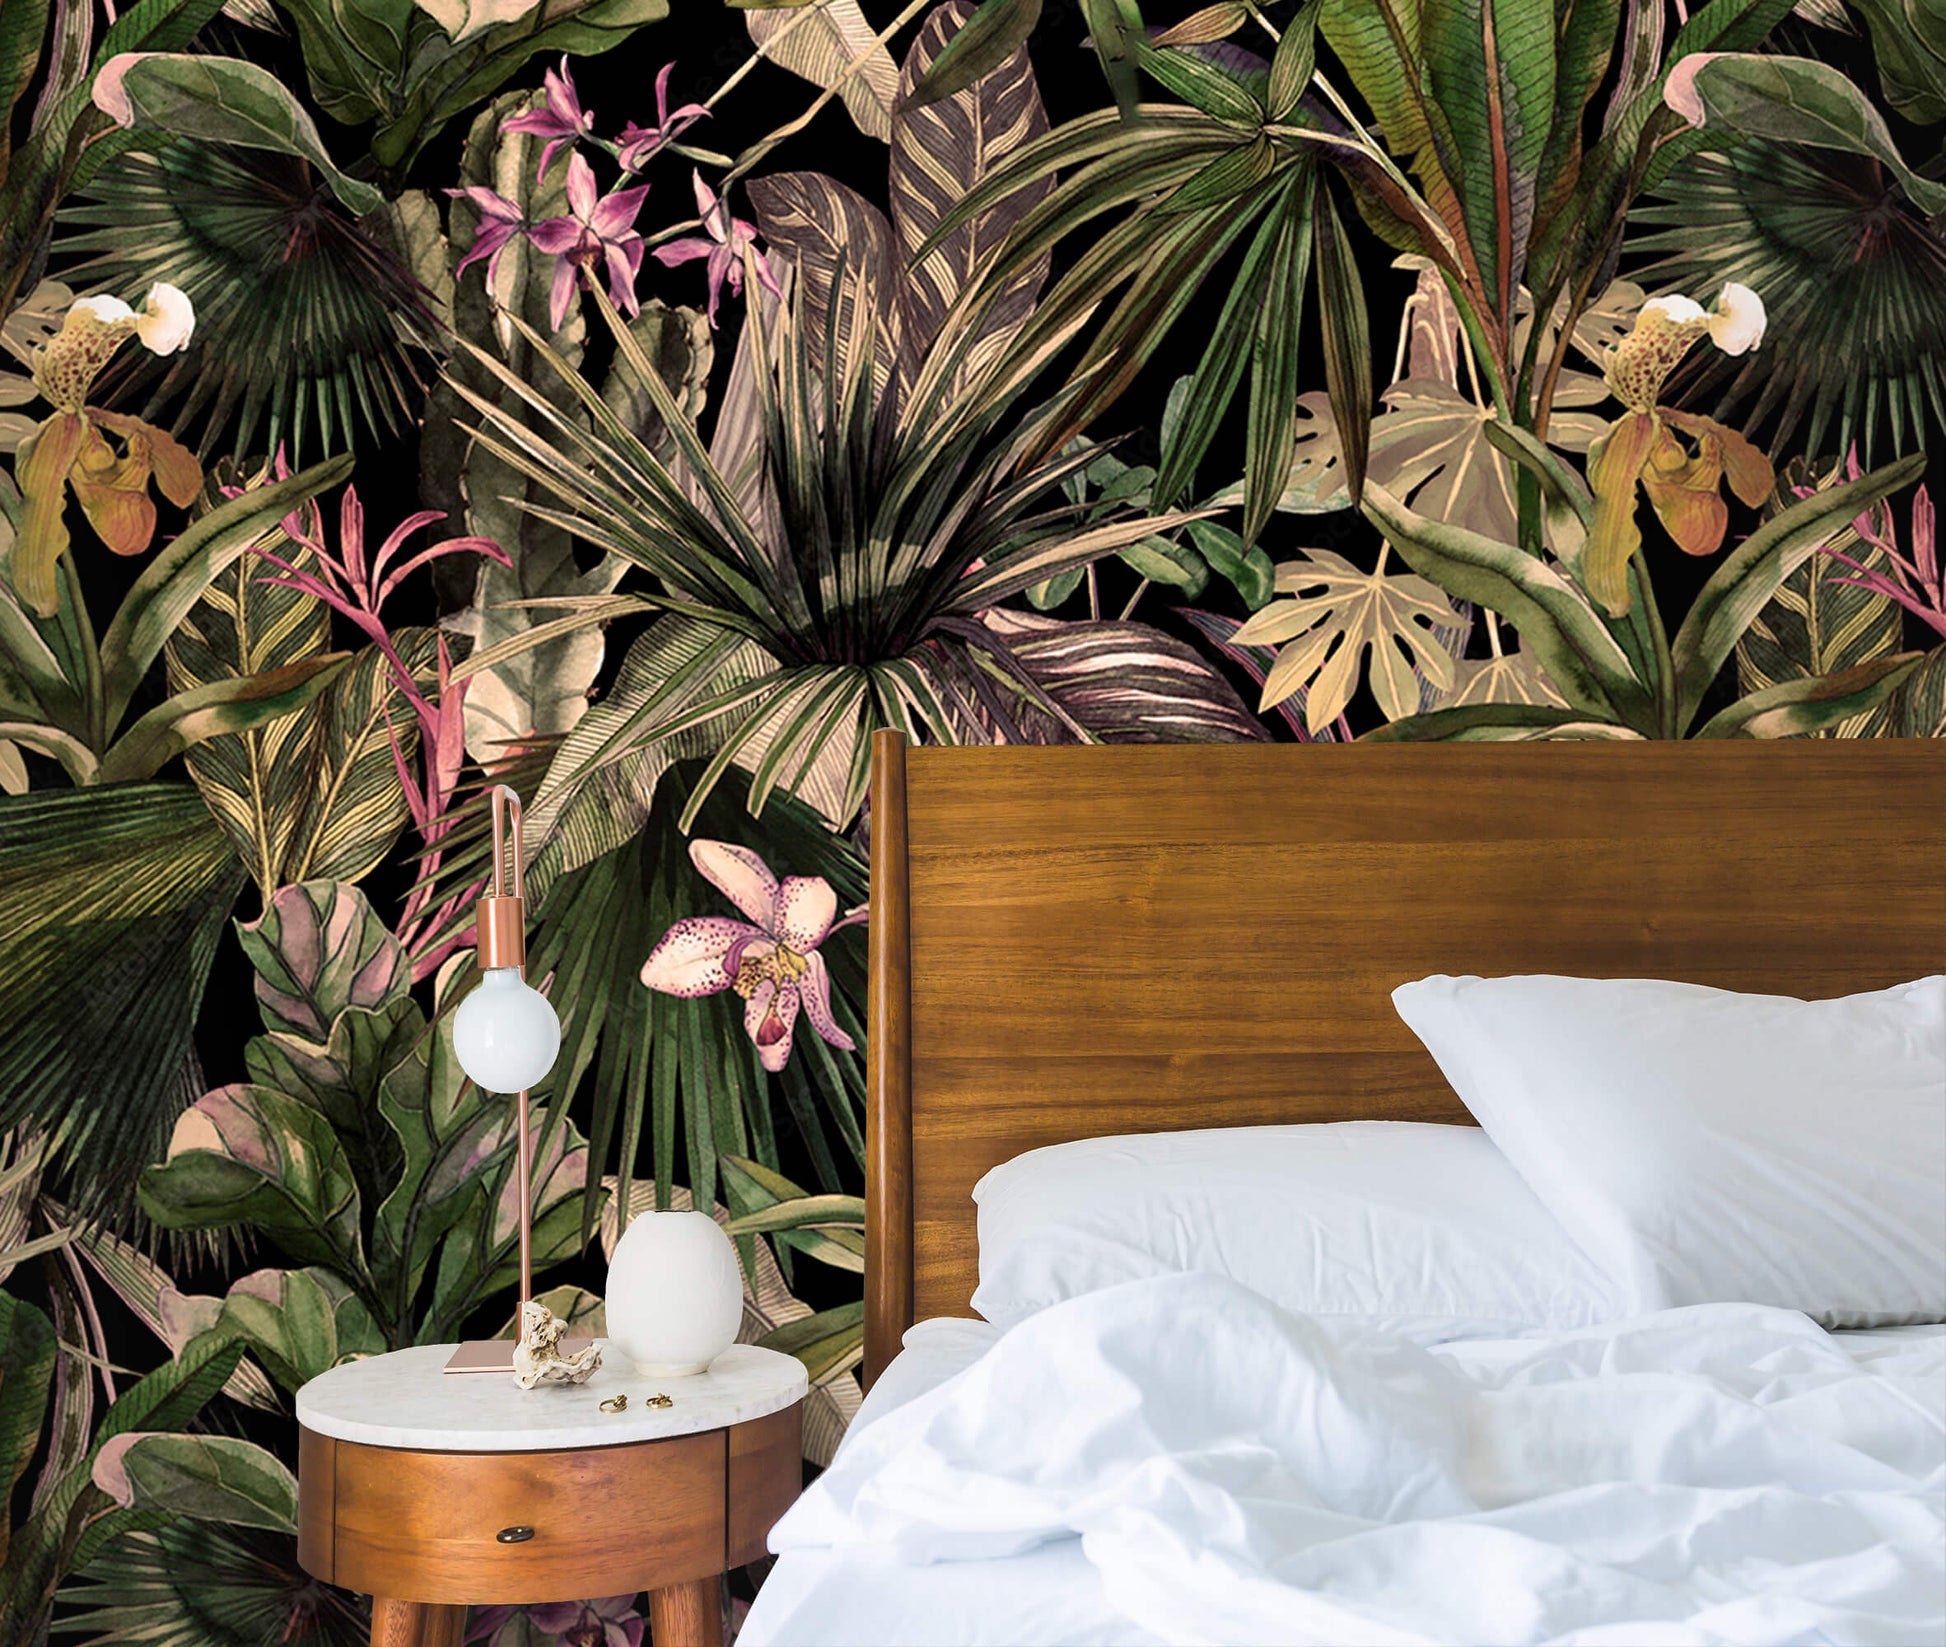 Step into a world of enchantment with the "Jungle Symphony" wallpaper. Vibrant colors and intricate jungle motifs dance across the walls, creating a symphony of nature's beauty. Transform your space into a captivating oasis with this whimsical and vibrant wallpaper design